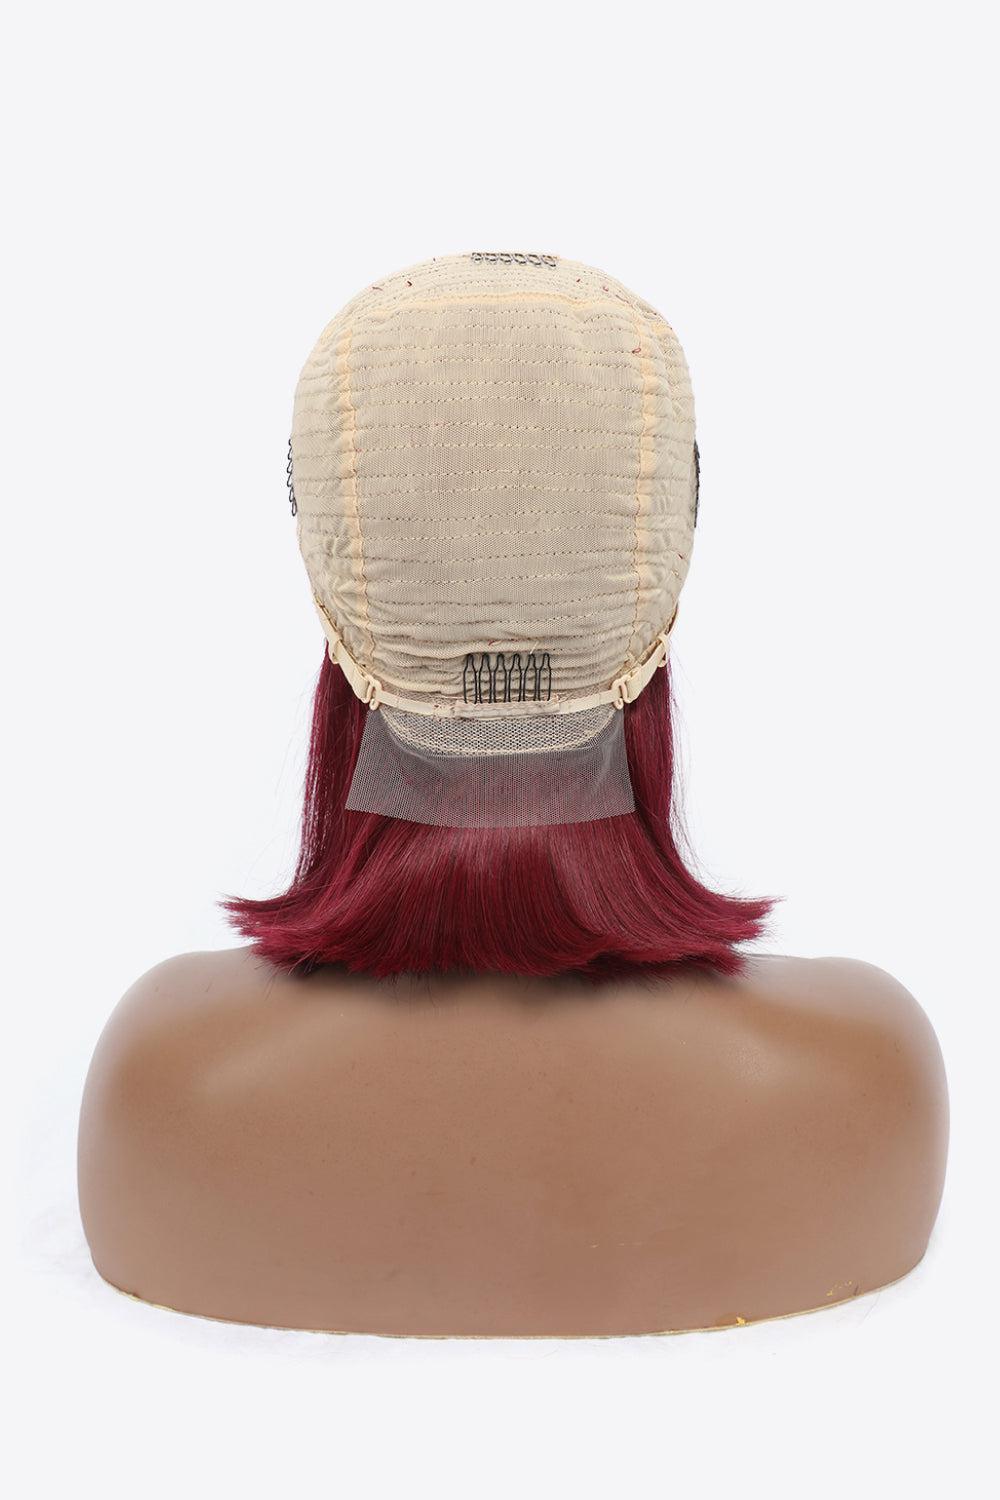 a wig with red hair on top of a mannequin head